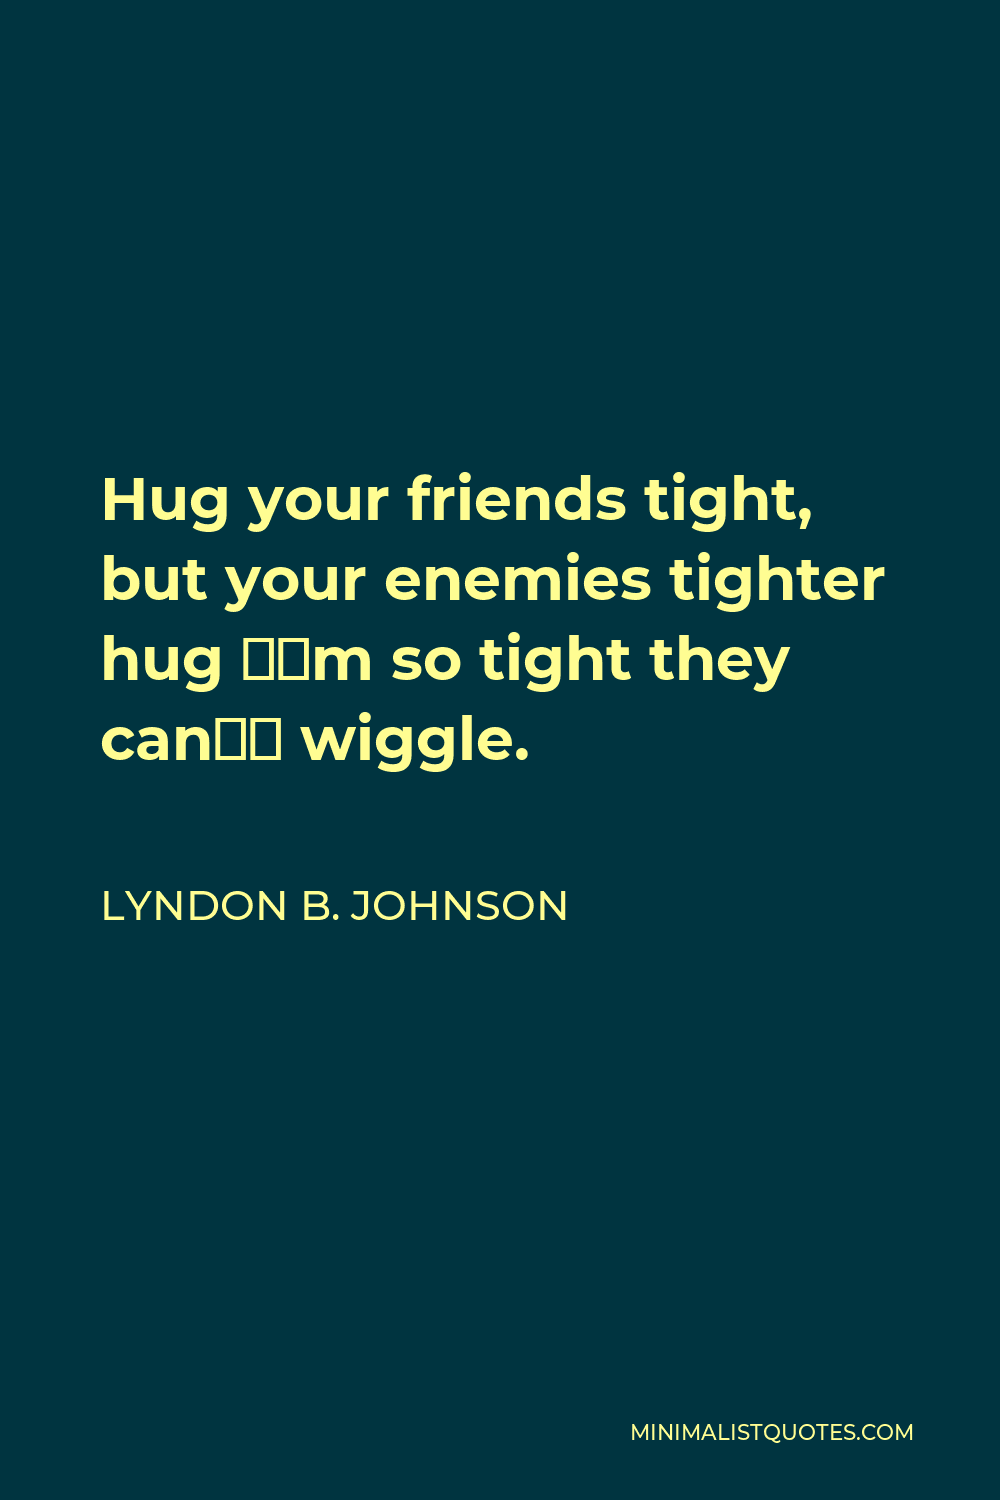 Lyndon B. Johnson Quote - Hug your friends tight, but your enemies tighter hug ‘em so tight they can’t wiggle.